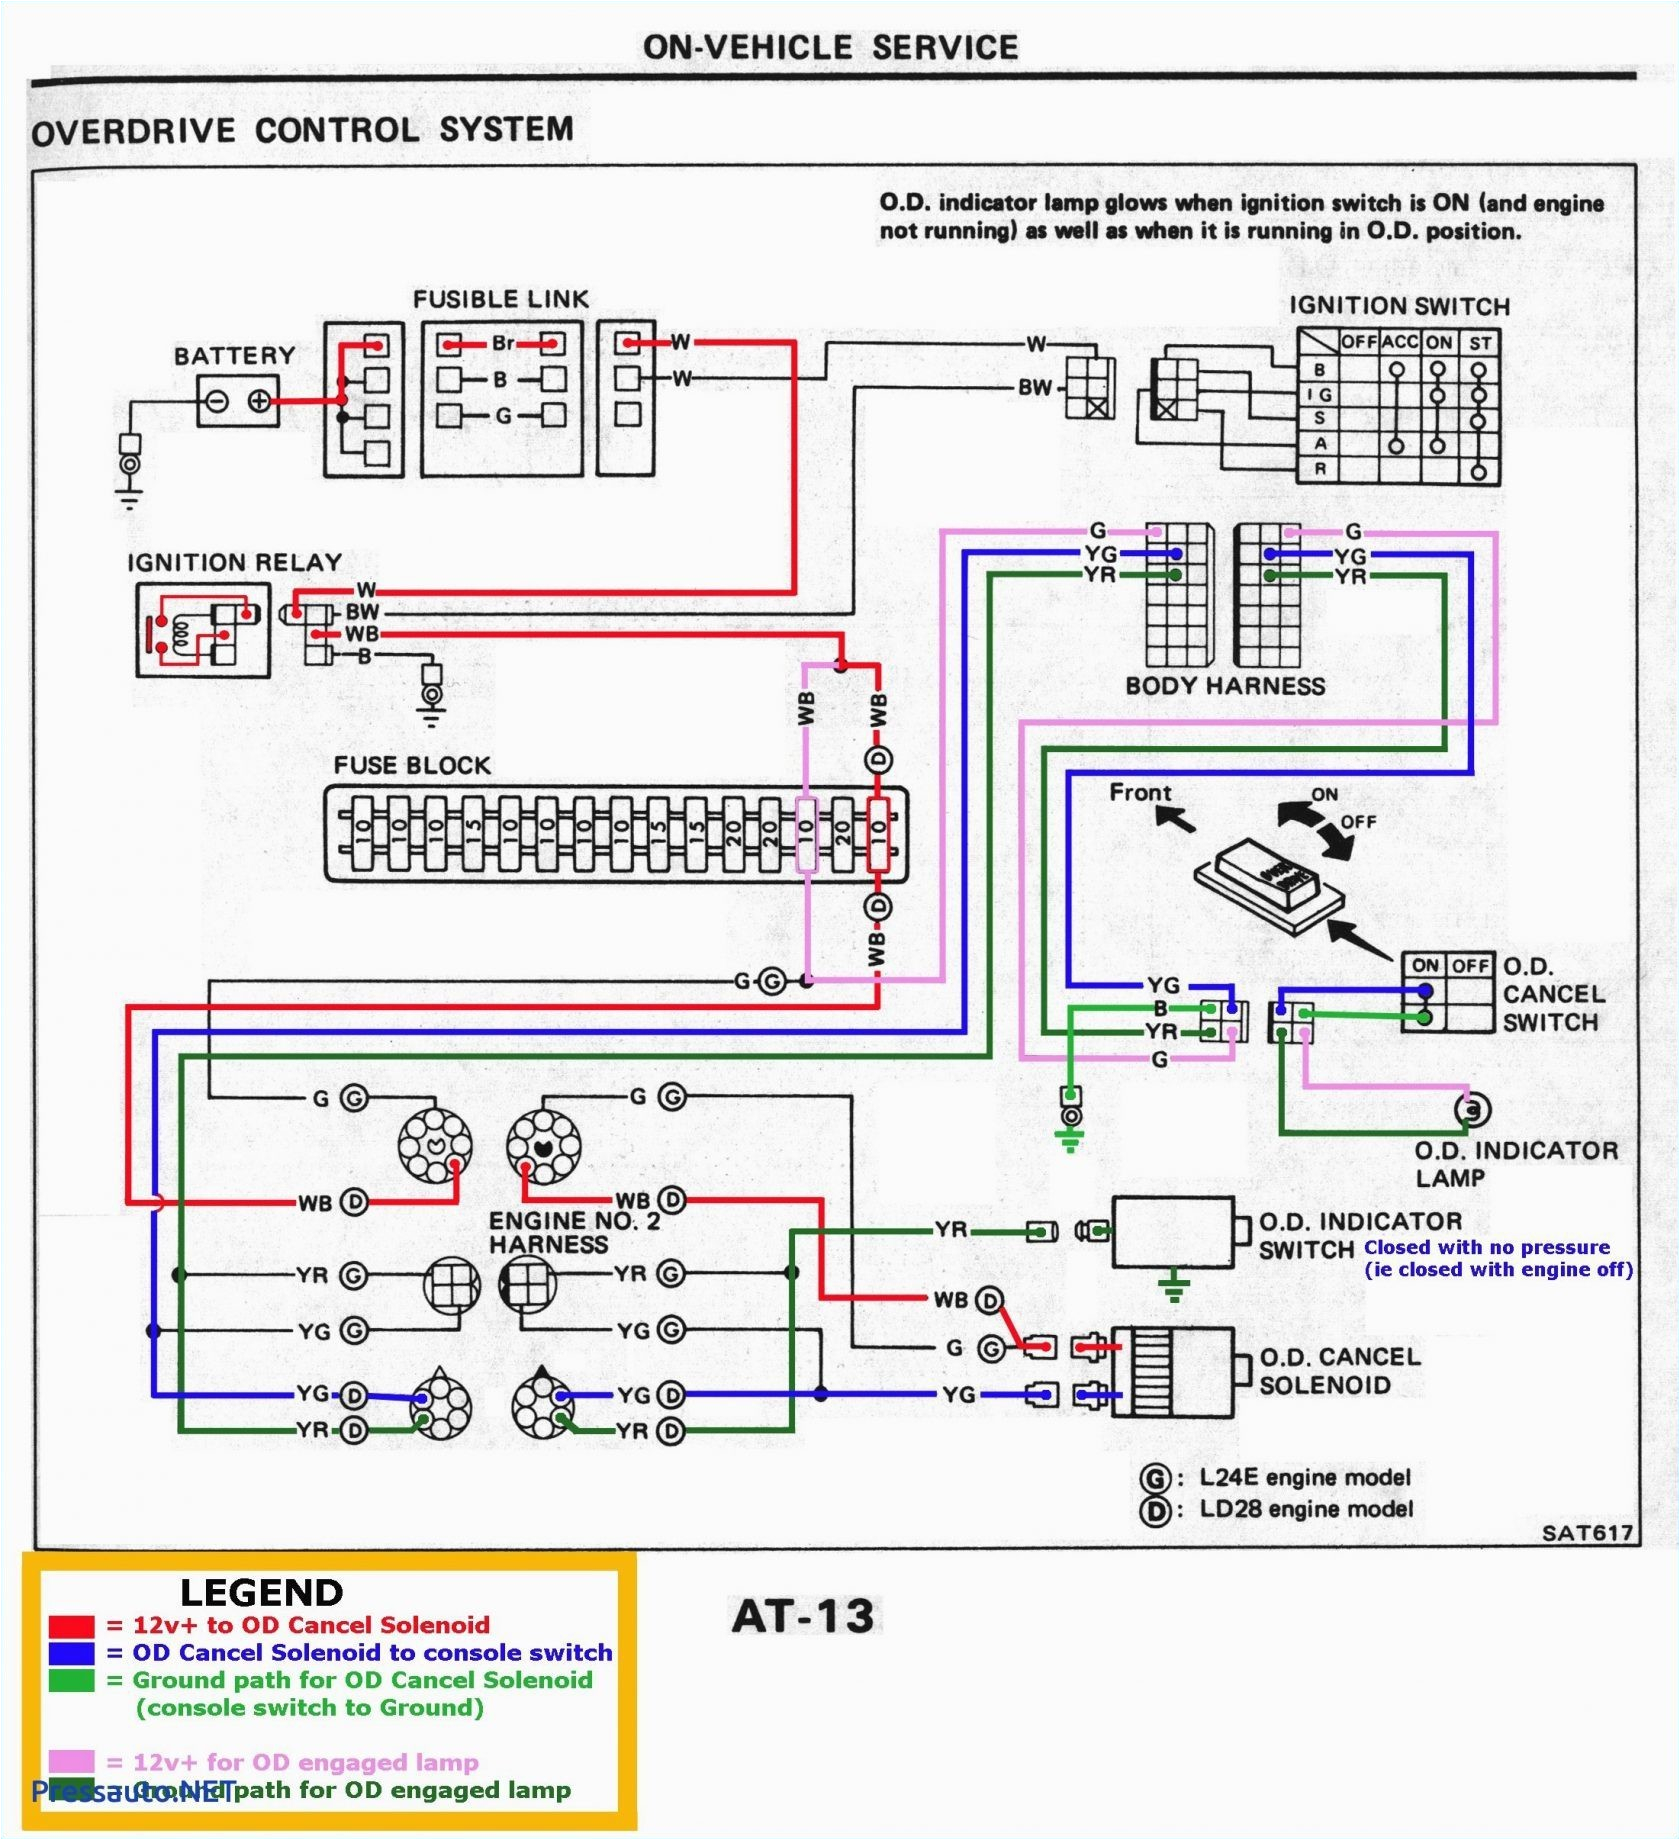 2001 jeep wrangler radio wiring wiring diagram new 1996 jeep cherokee stereo wiring diagram 2001 chevy